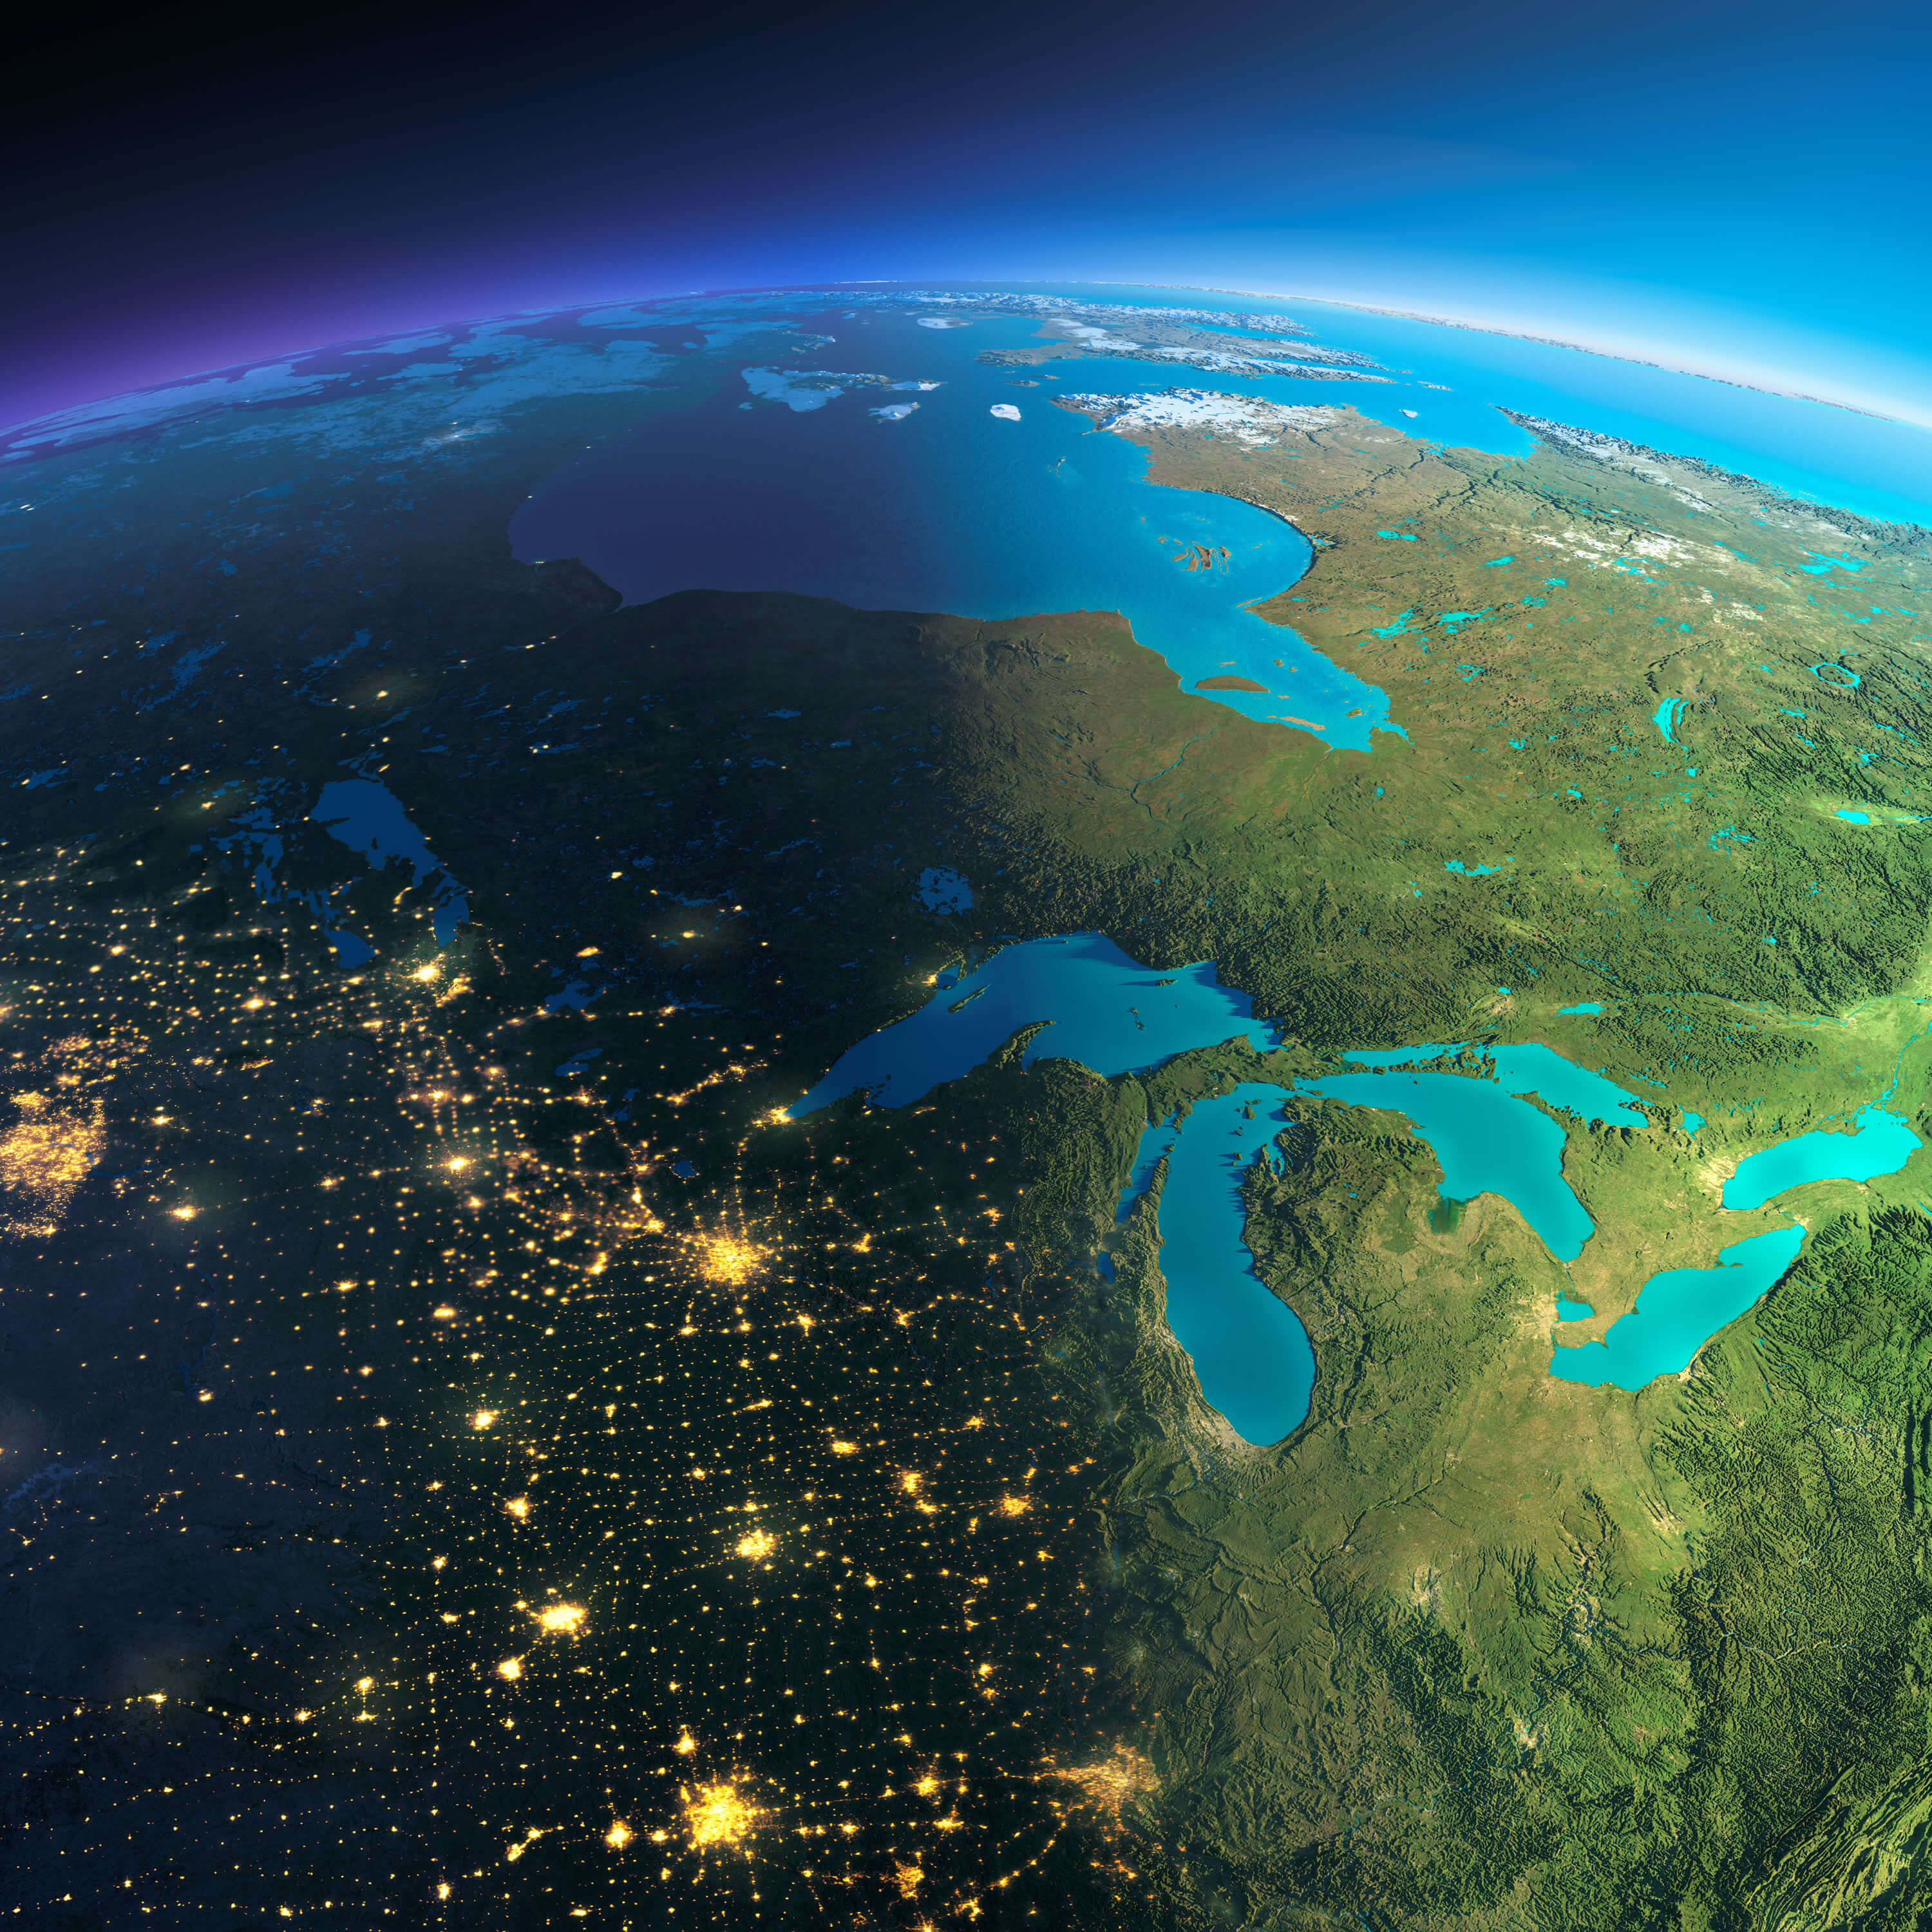 Highly Detailed Planet Earth and The Northern US States - Canada